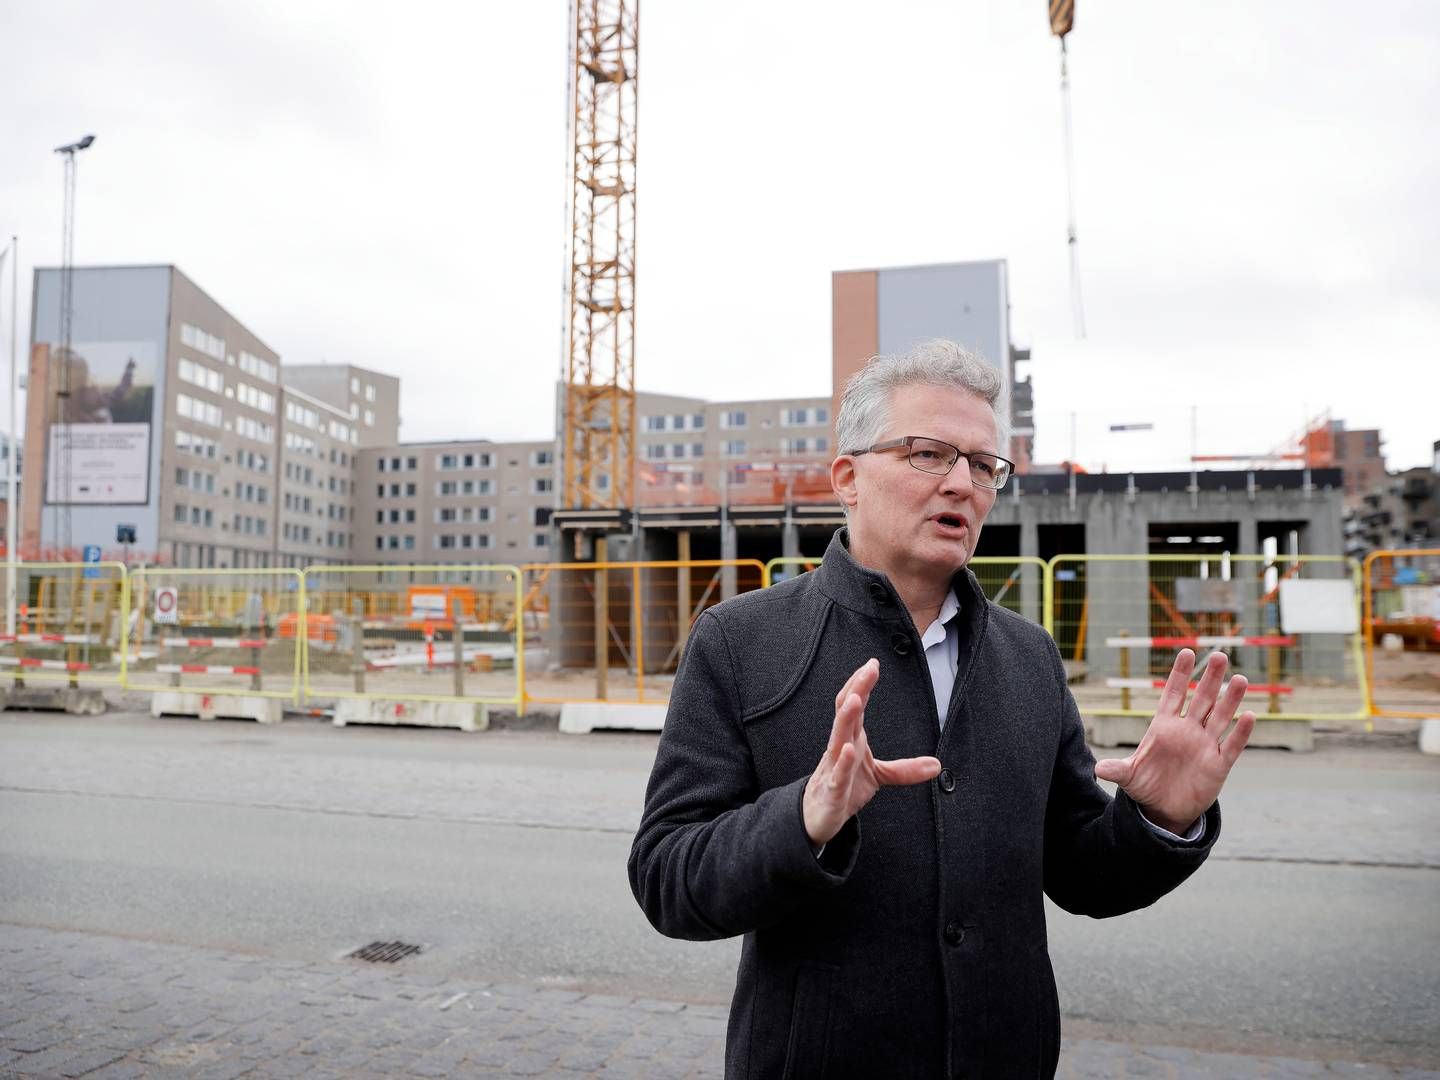 The CEO of The National Building Fund, Bent Madsen in front of a public housing project in Copenhagen. | Photo: Jens Dresling // Politiken